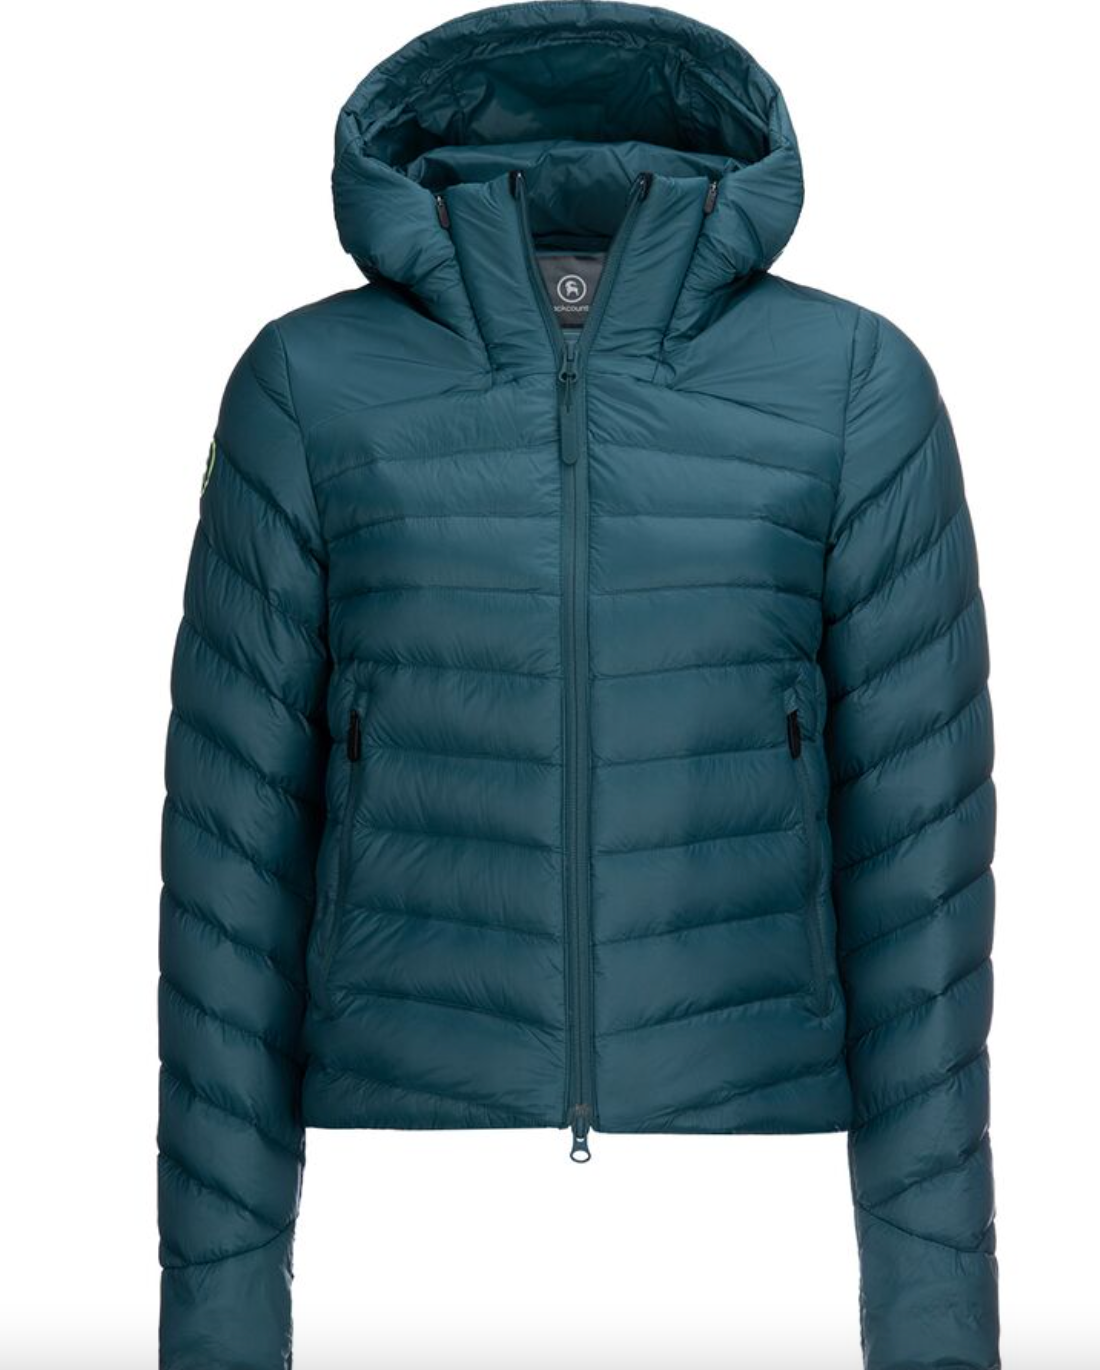 Backcountry Teo Down Jacket